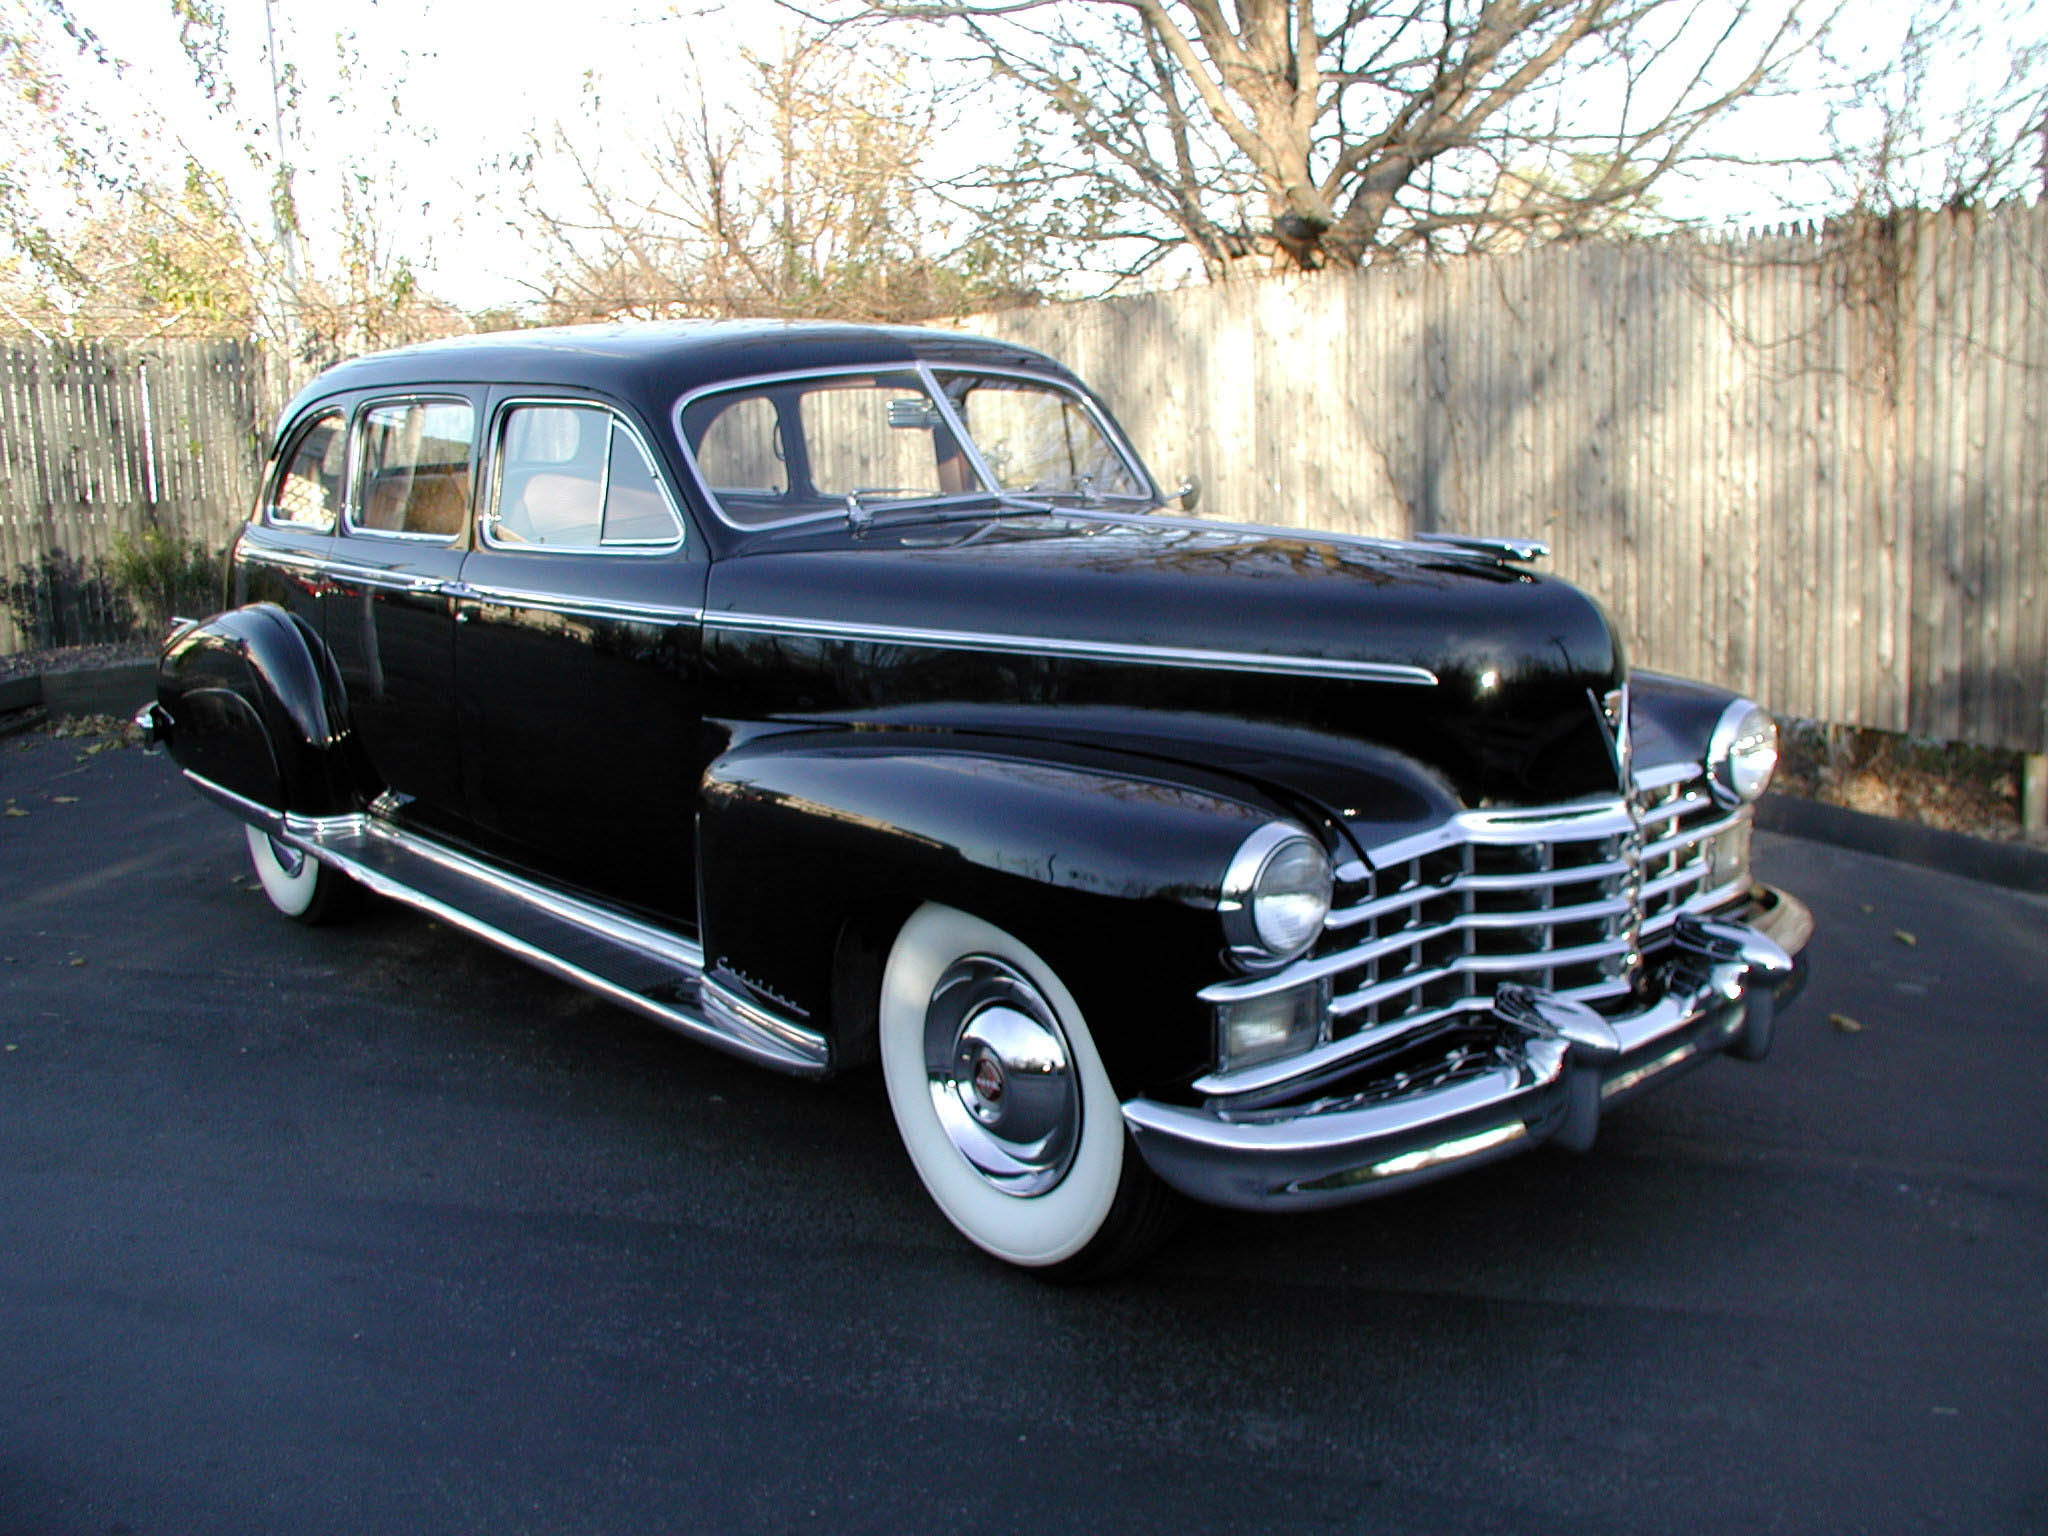 1949 cadillac fleetwood series 75 imperial